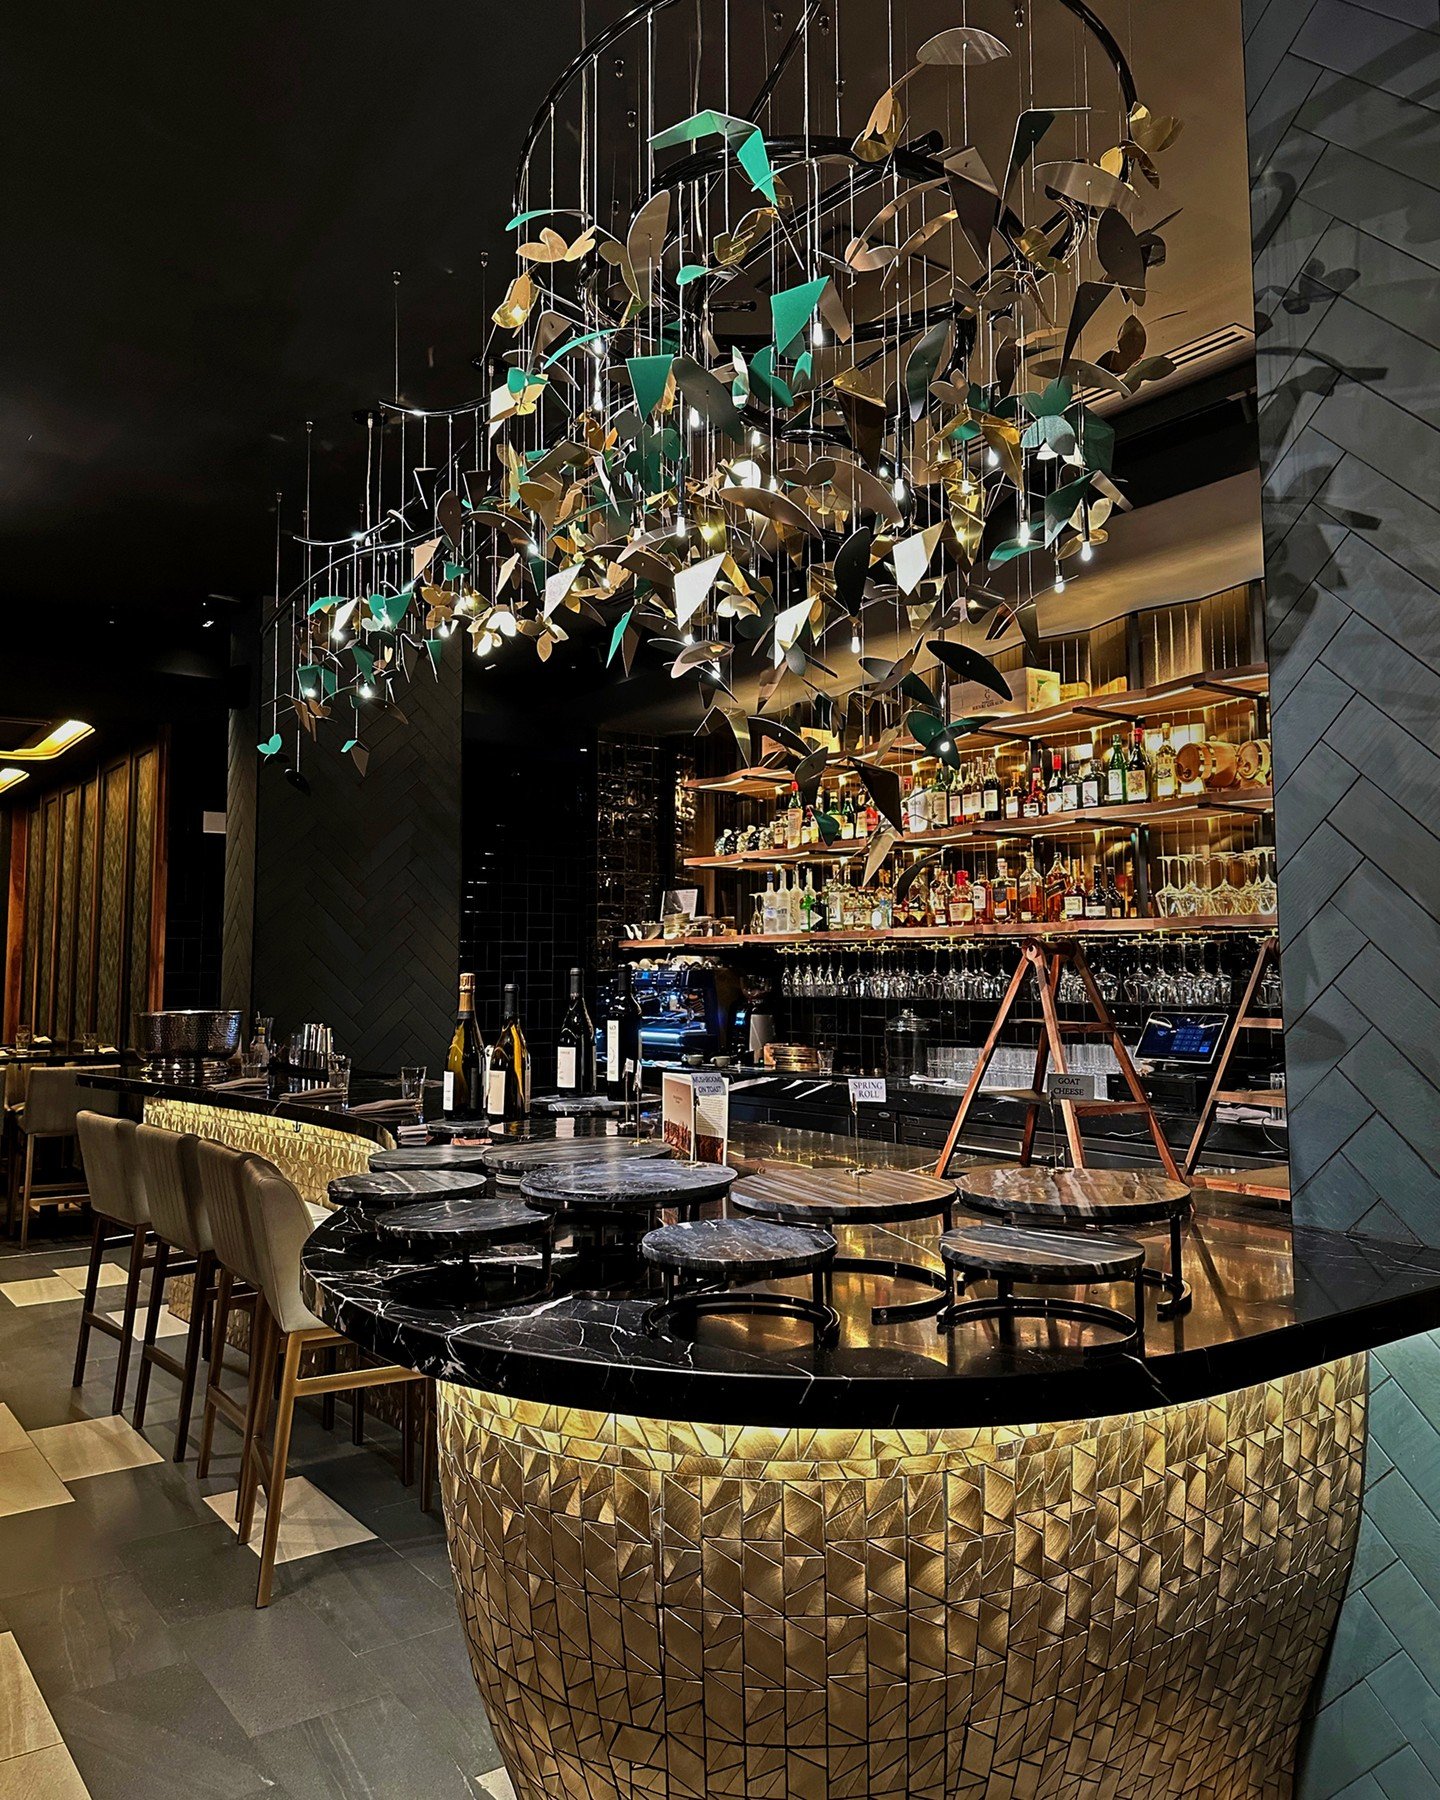 A sensual experience in Yorkville: Recently opened restaurant and wine bar &ldquo;St. Thomas&rdquo; (at 23 St. Thomas Street) offers tapas and wine-pairing dinners in a sumptuous setting. The sister spot to the Michelin-starred Enigma, their artful c